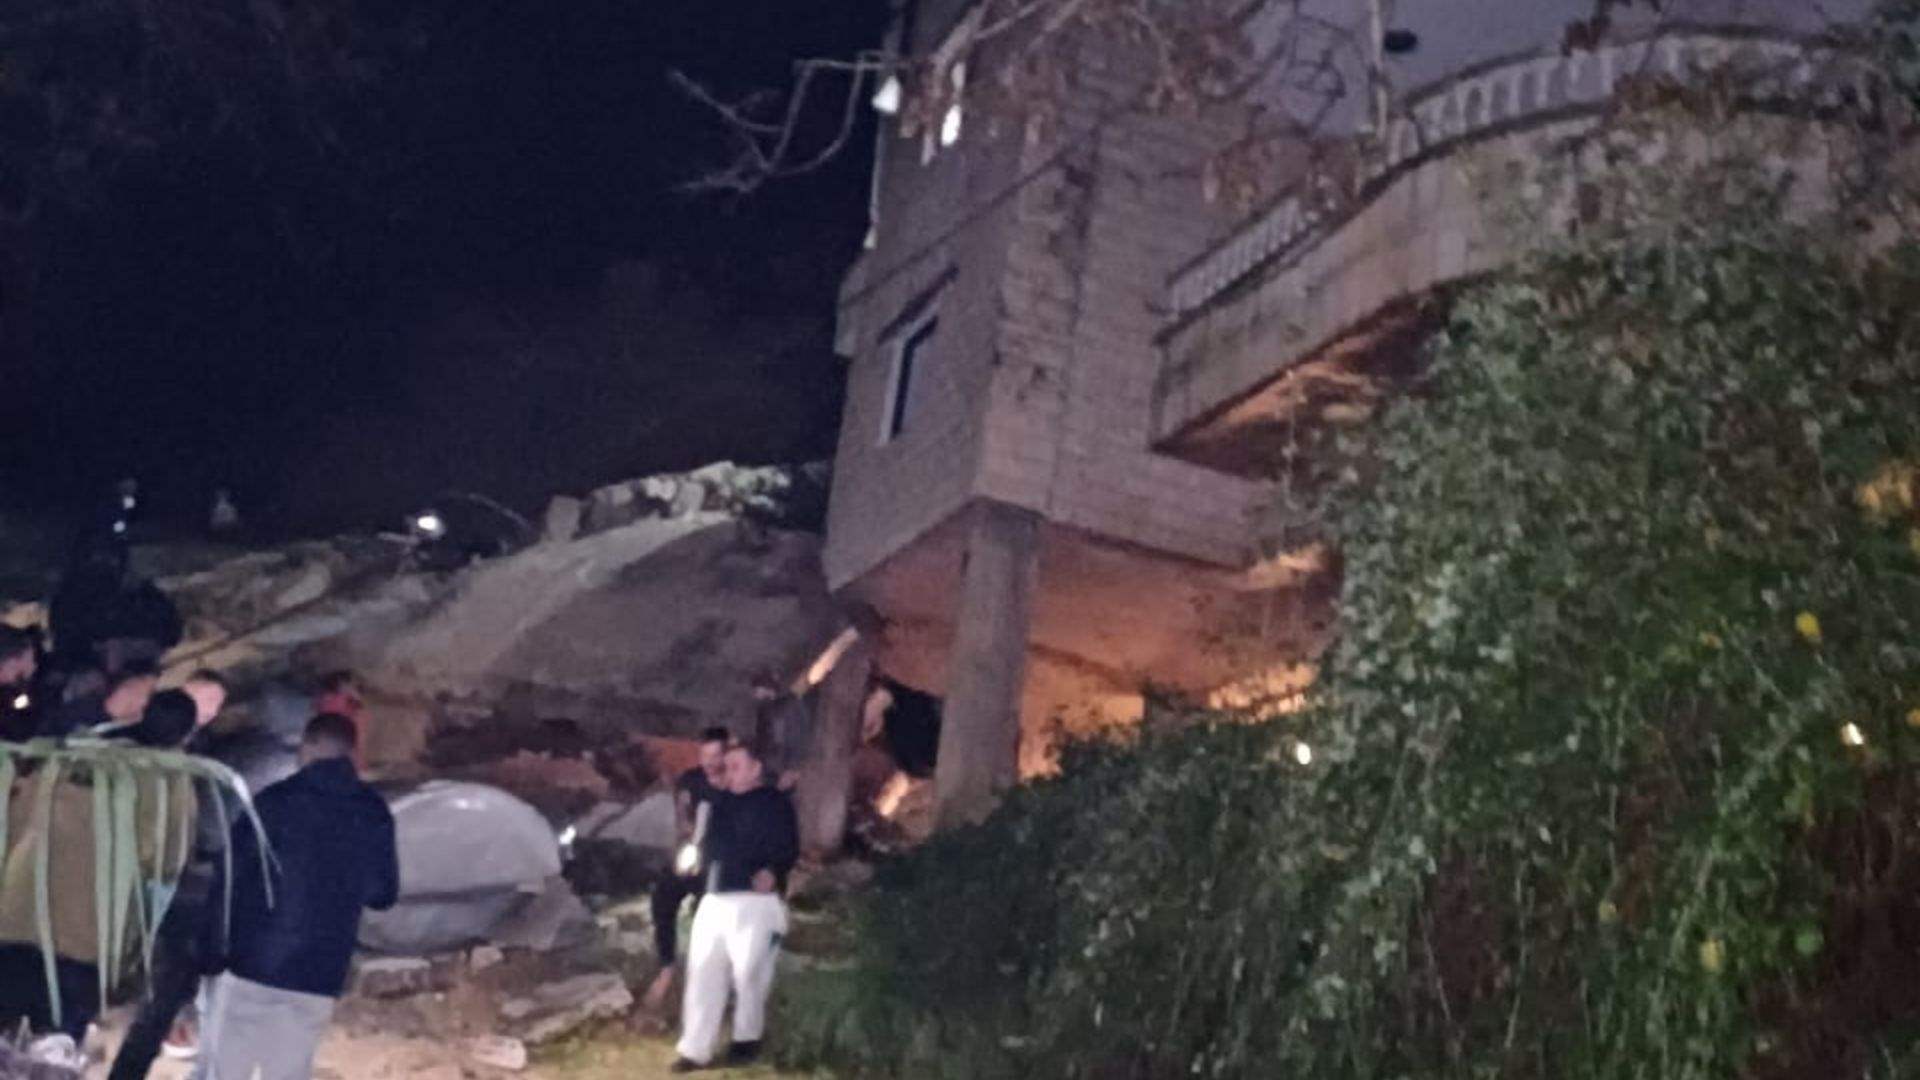 Breaking: Building collapses in Choueifat area with initial reports of injuries